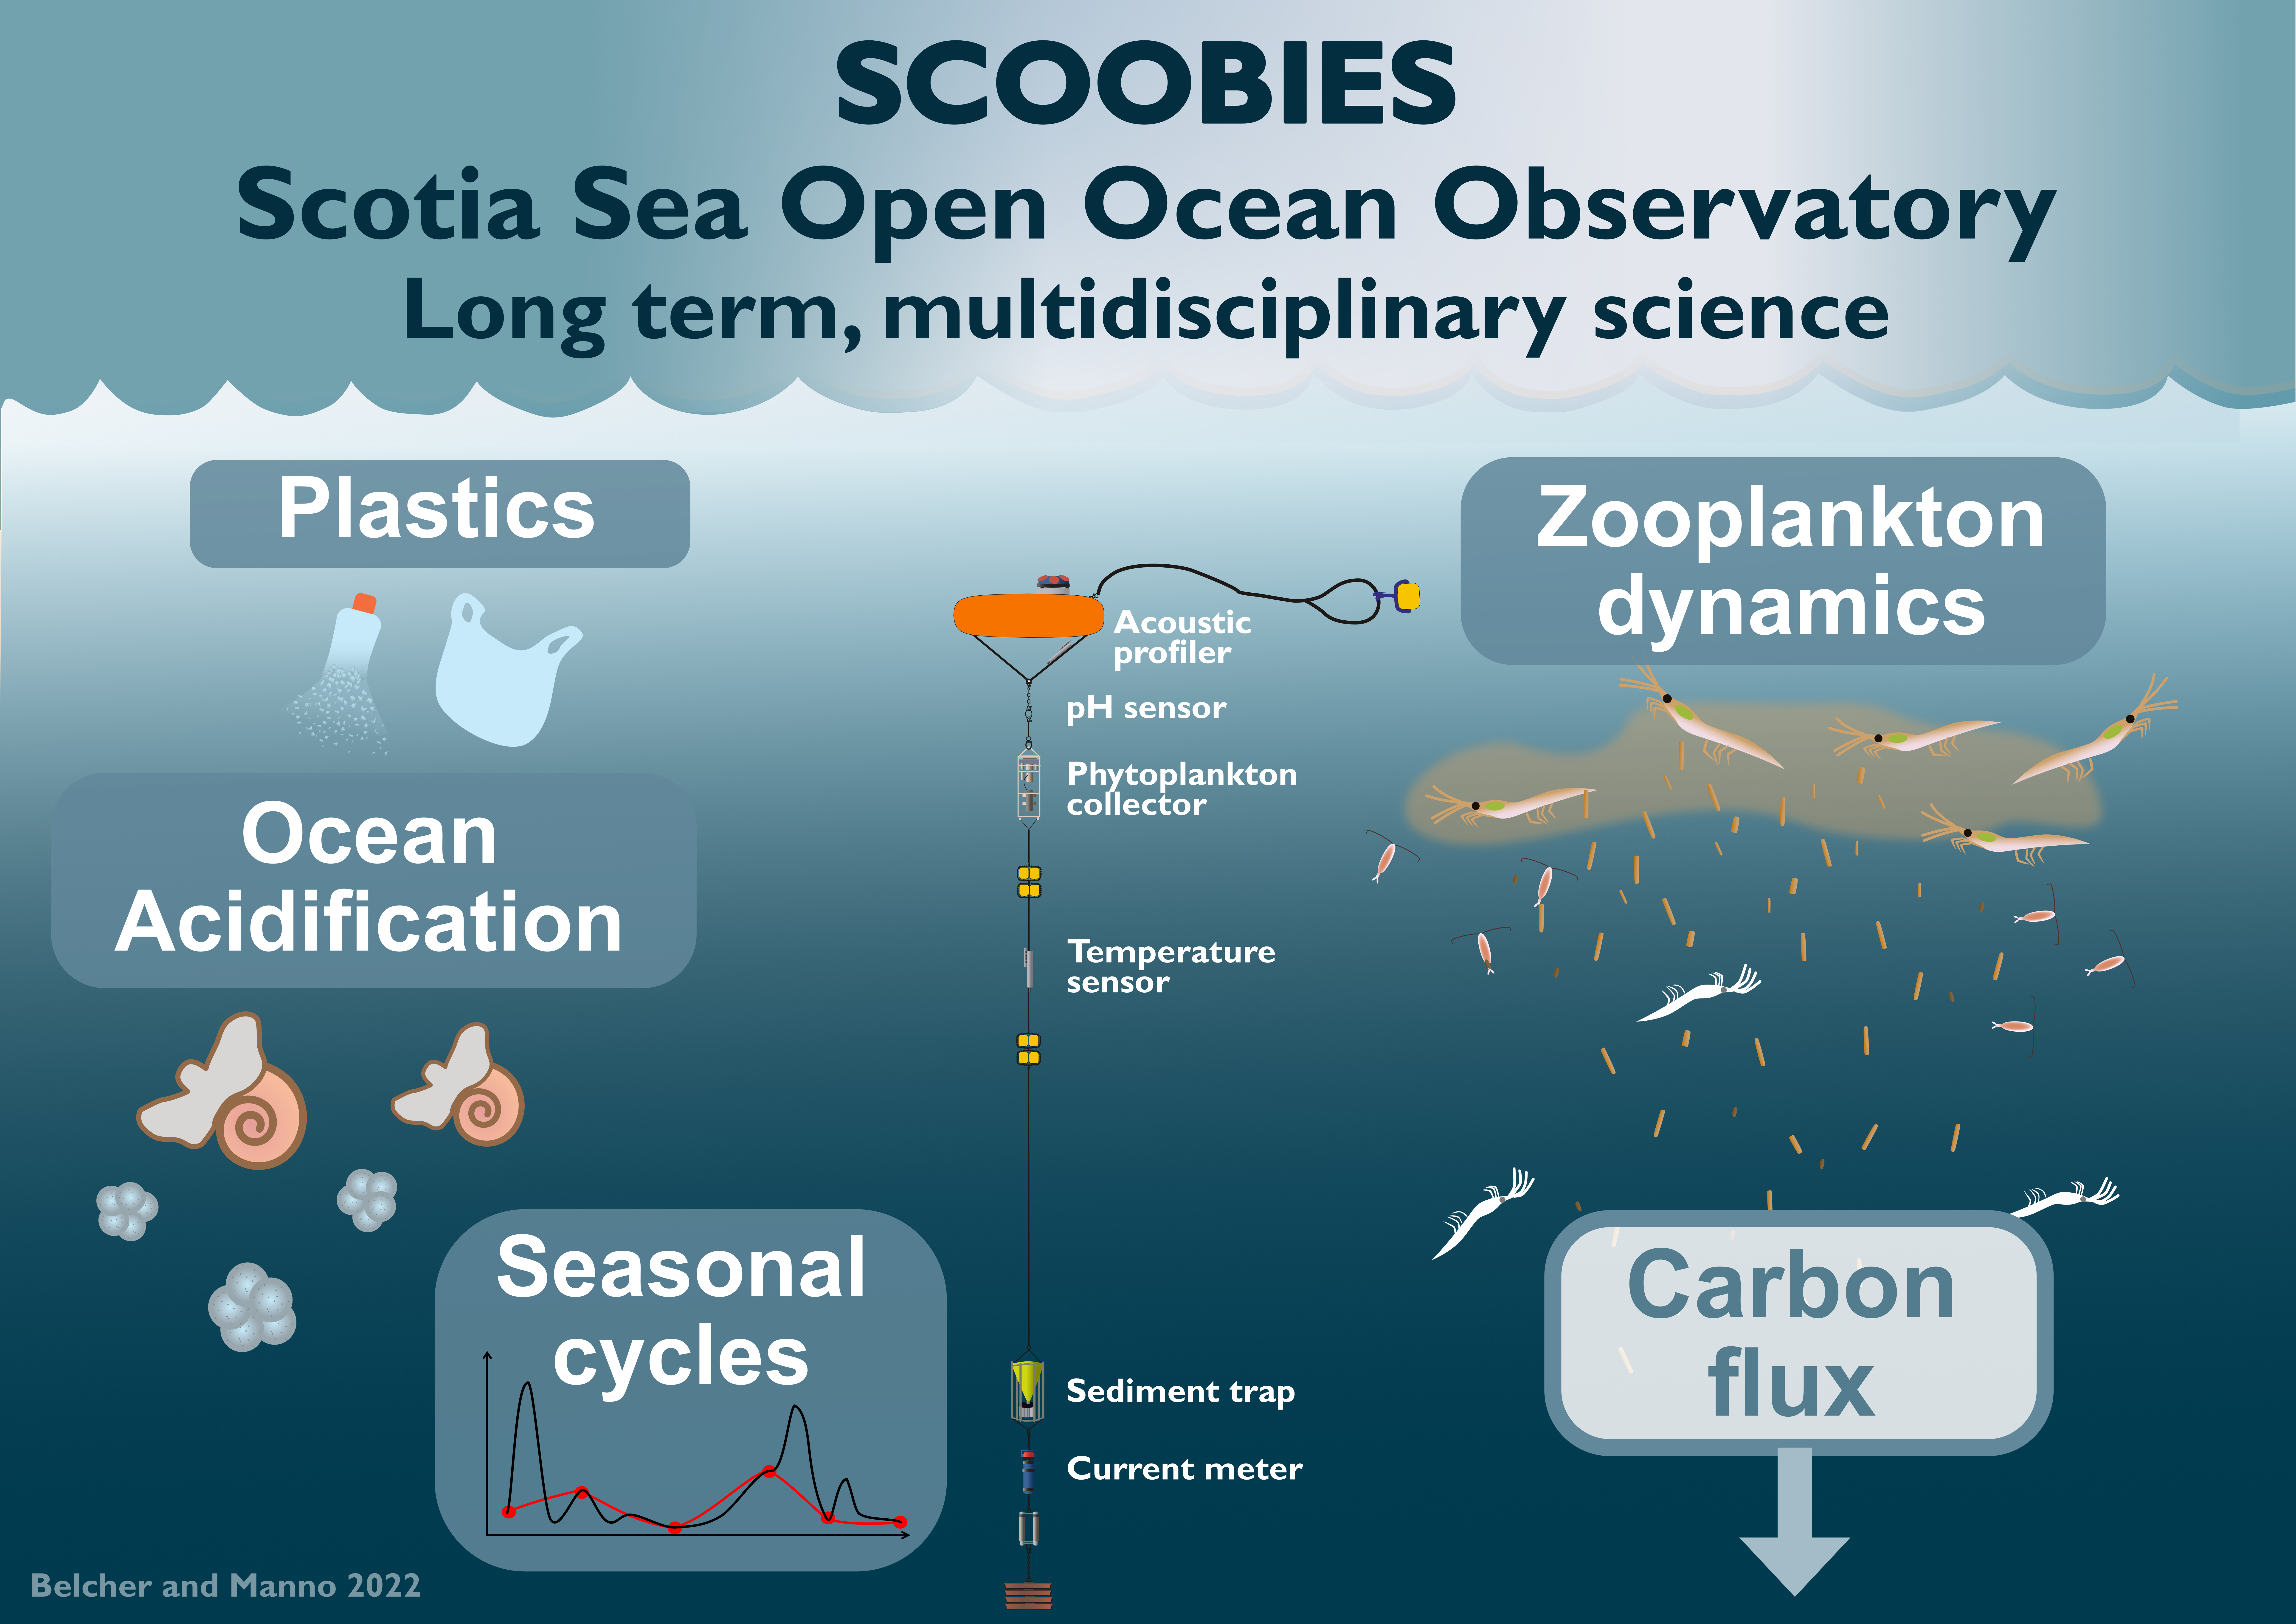 Infographic to show the important science outputs of the SCOOBIES site: Plastics, zooplankton dynamics, ocean acidification; seasonal cycles; carbon flux